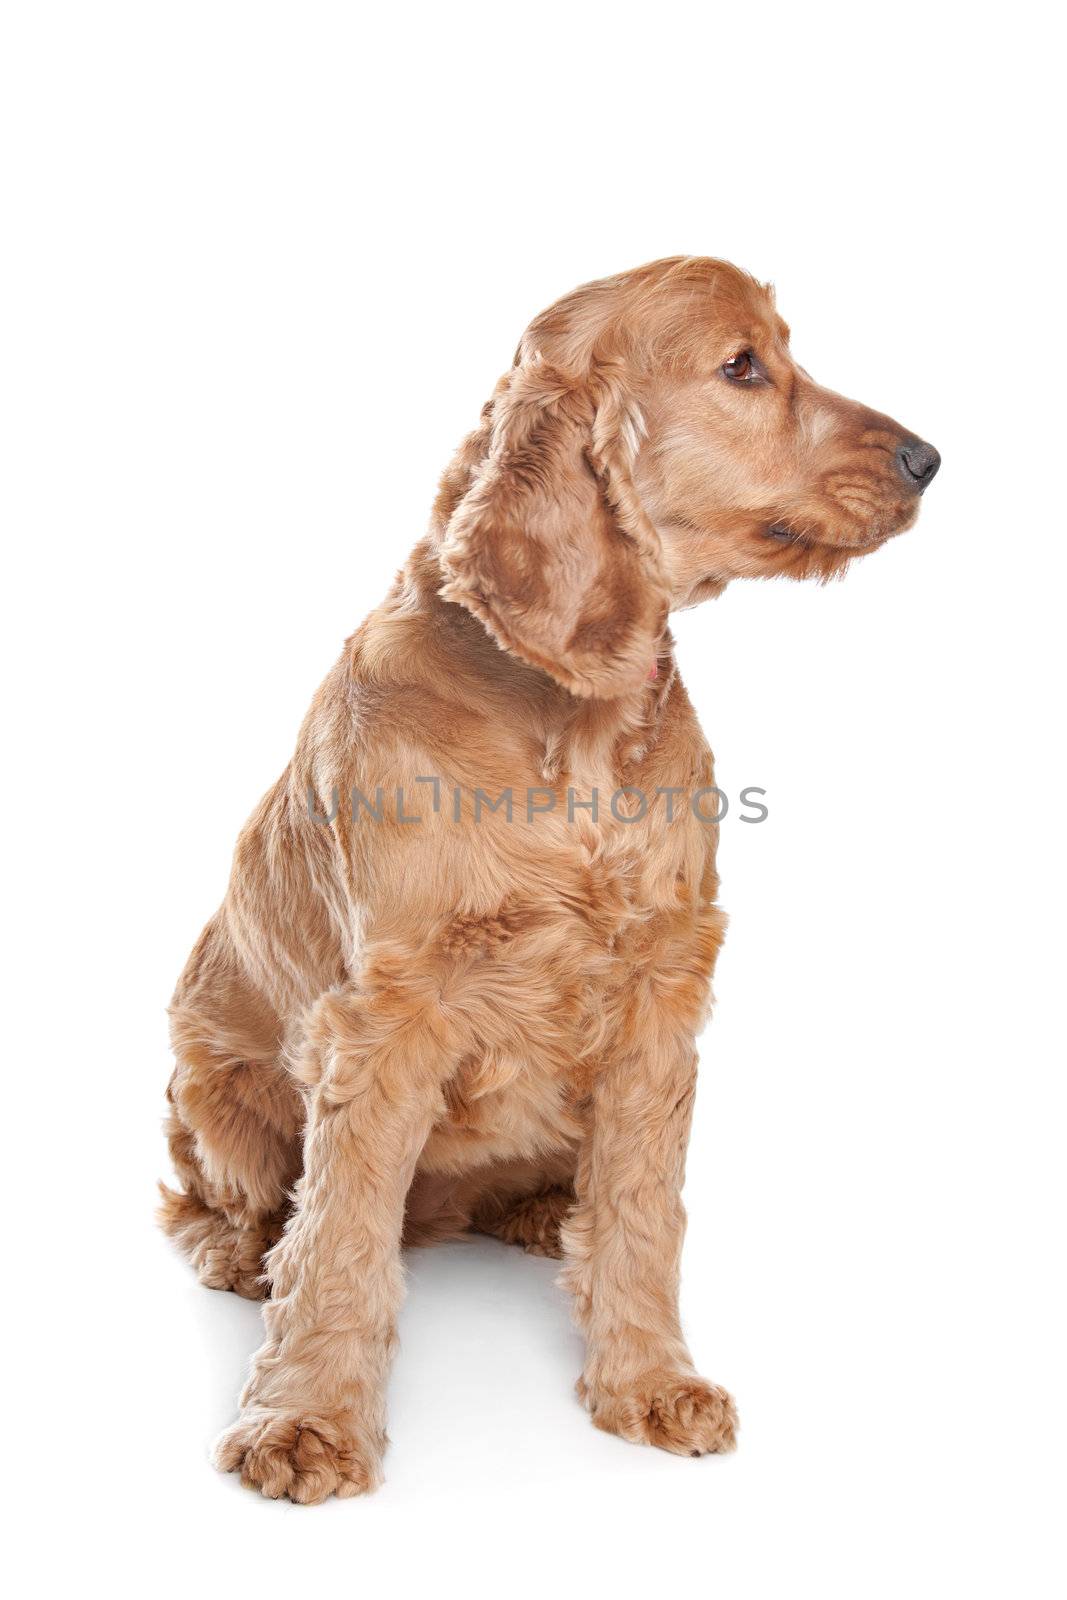 Brown cocker spaniel dog in front of a white background